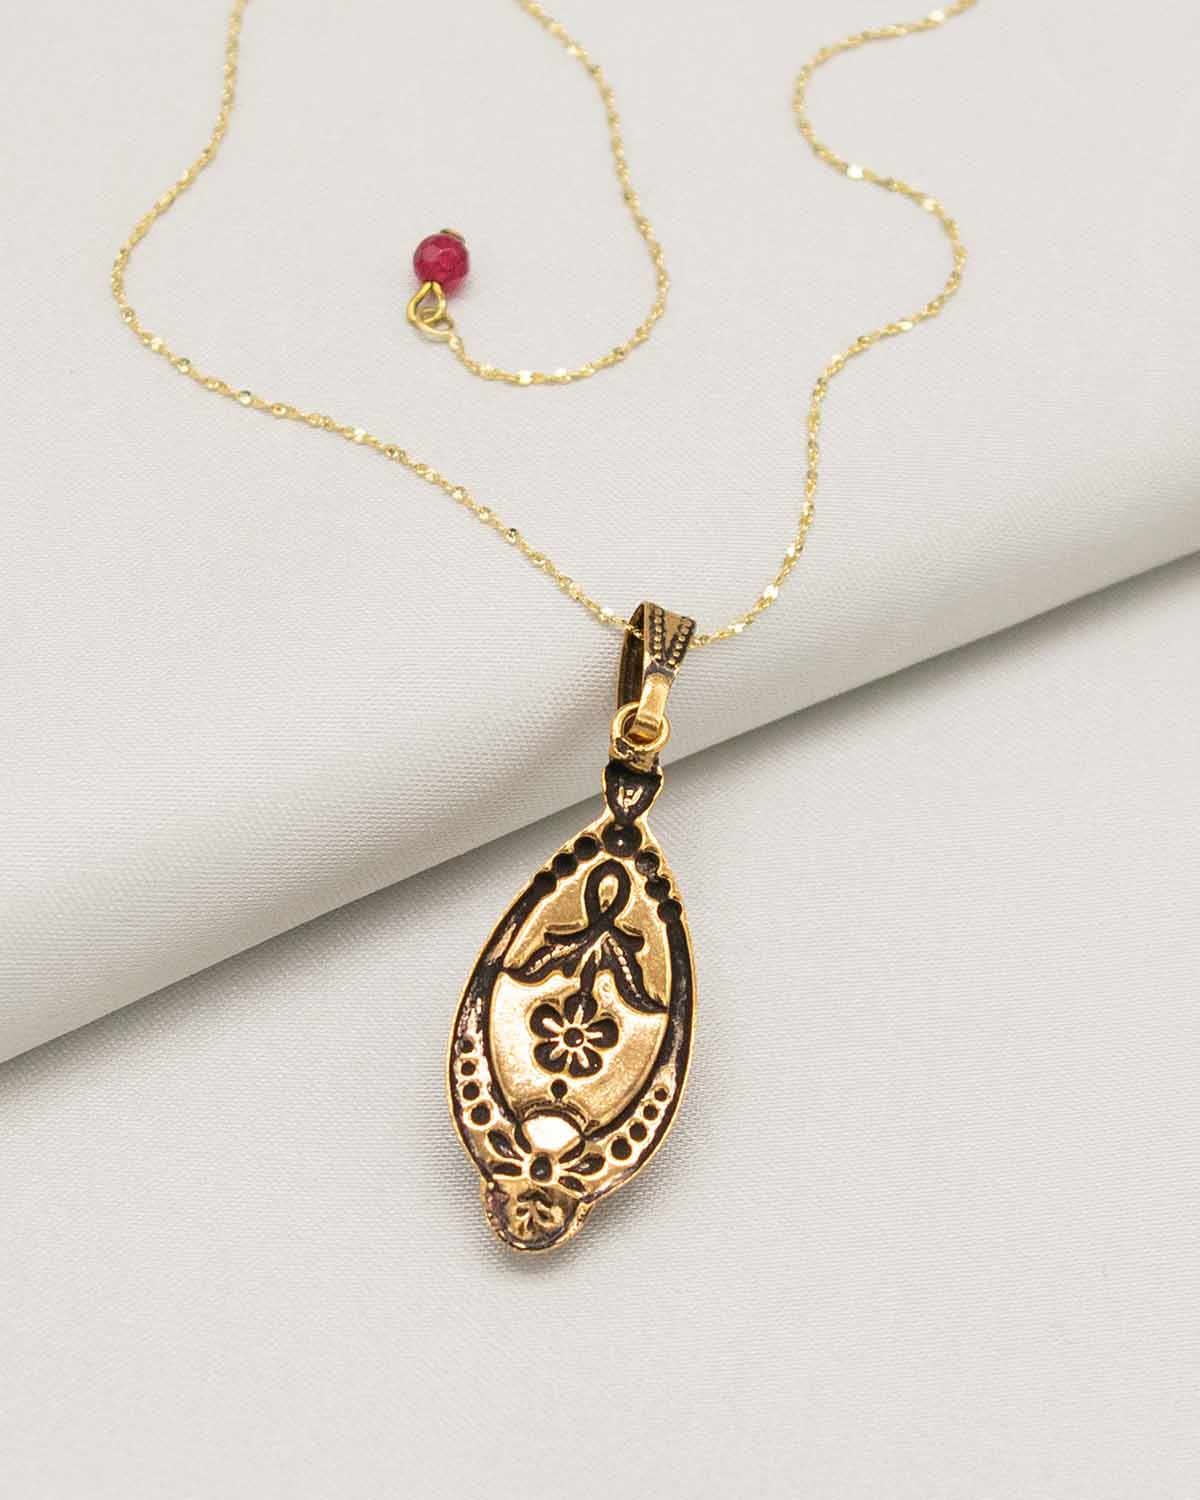 Necklace – Vintage Jewelry in Royal | Pendant Ortica Style Italy) (Handmade Magenta